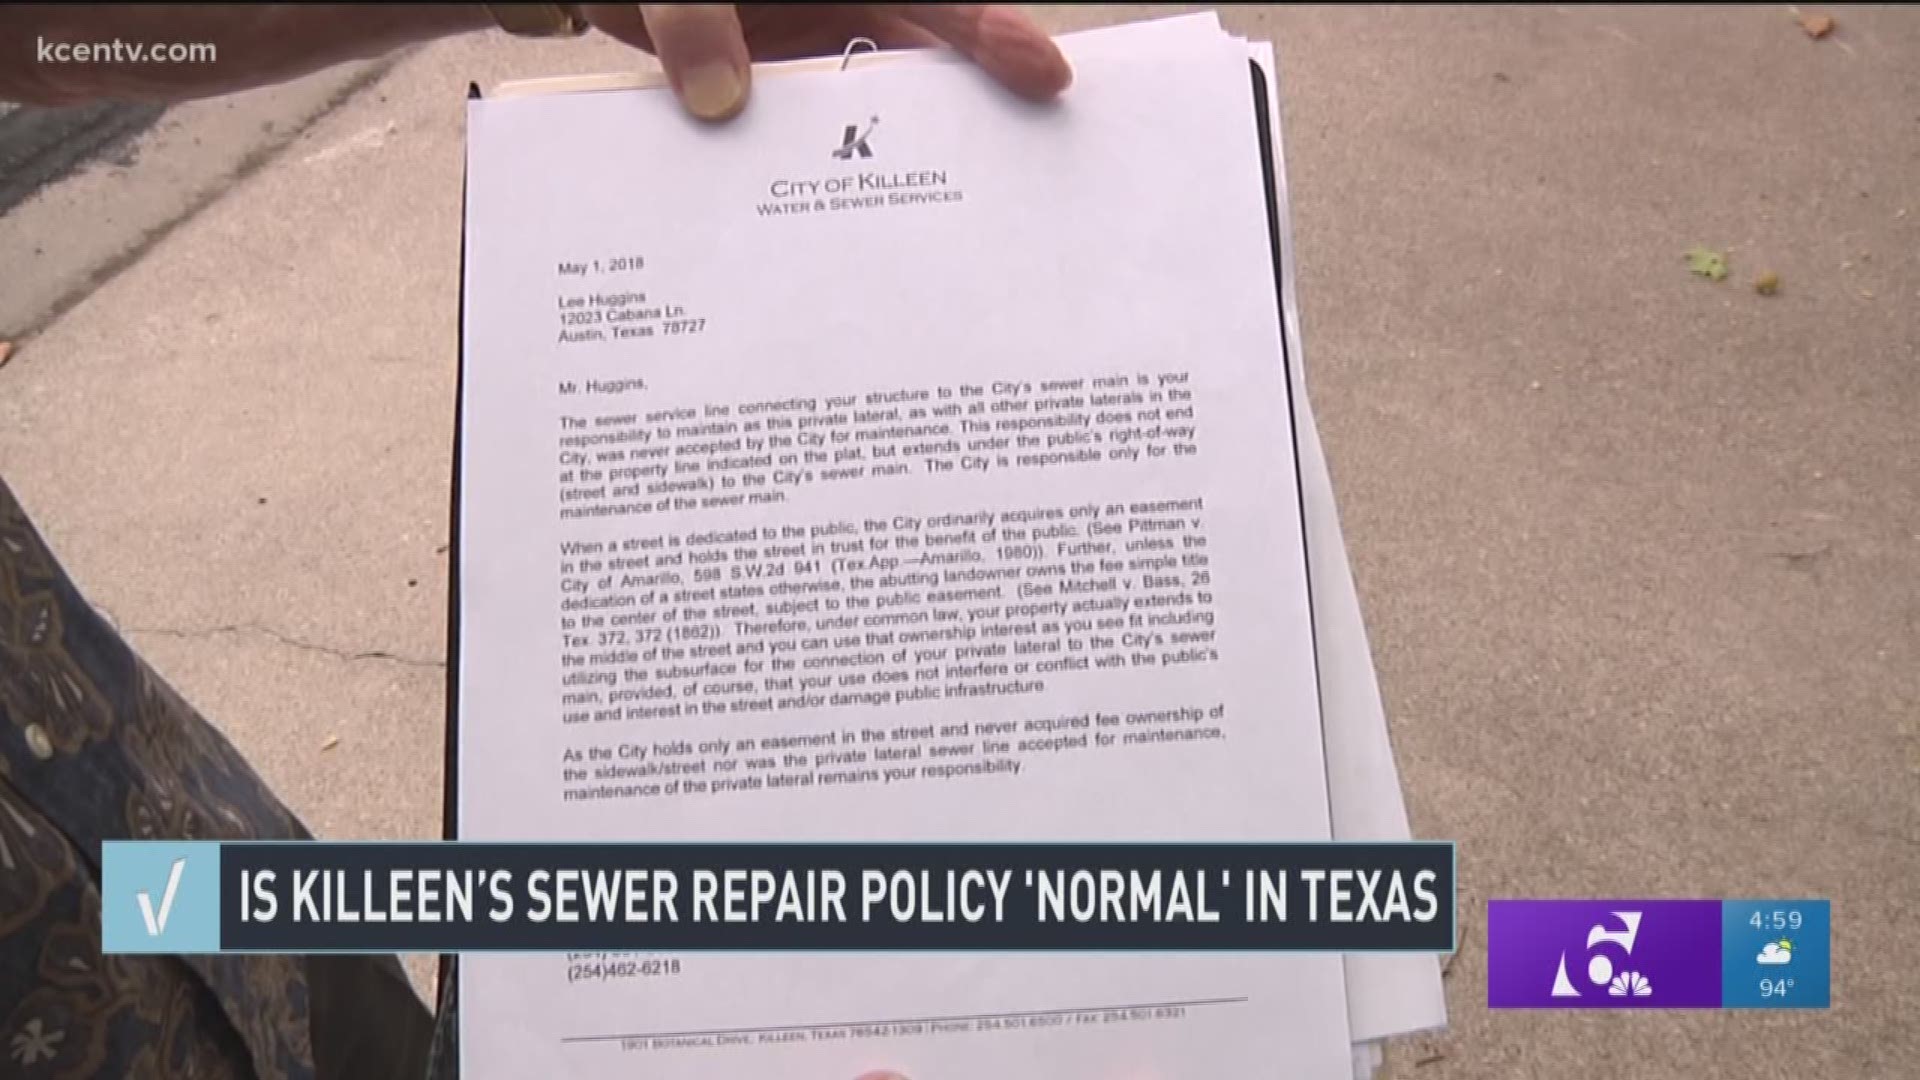 Is Killeen's sewer repair policy normal in Texas